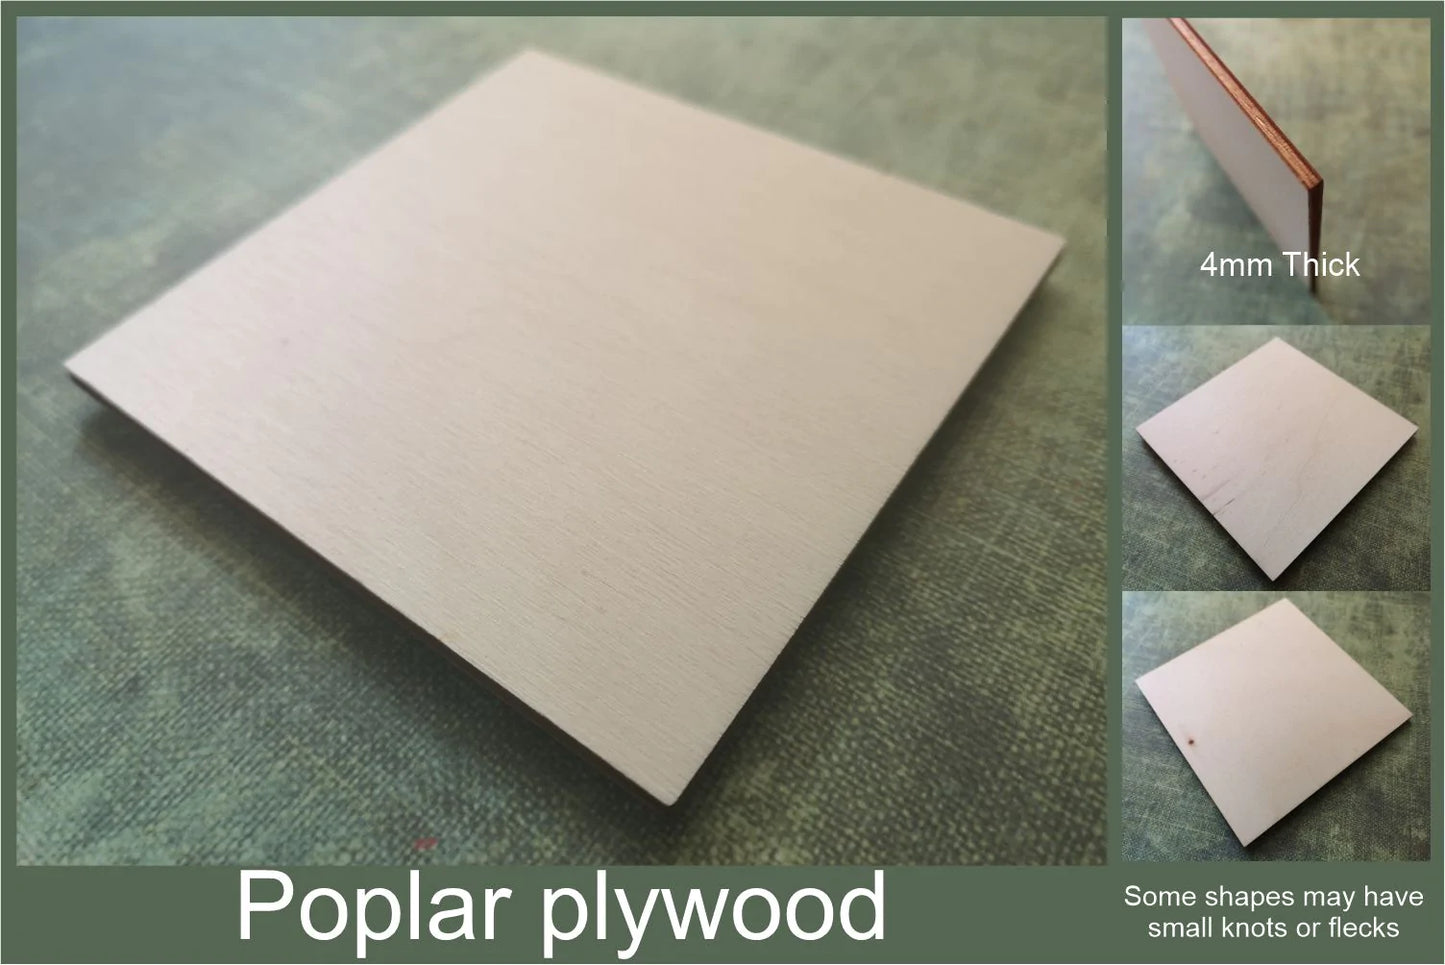 4mm thick poplar plywood used to make the Pointed cross cut-outs ready for crafting